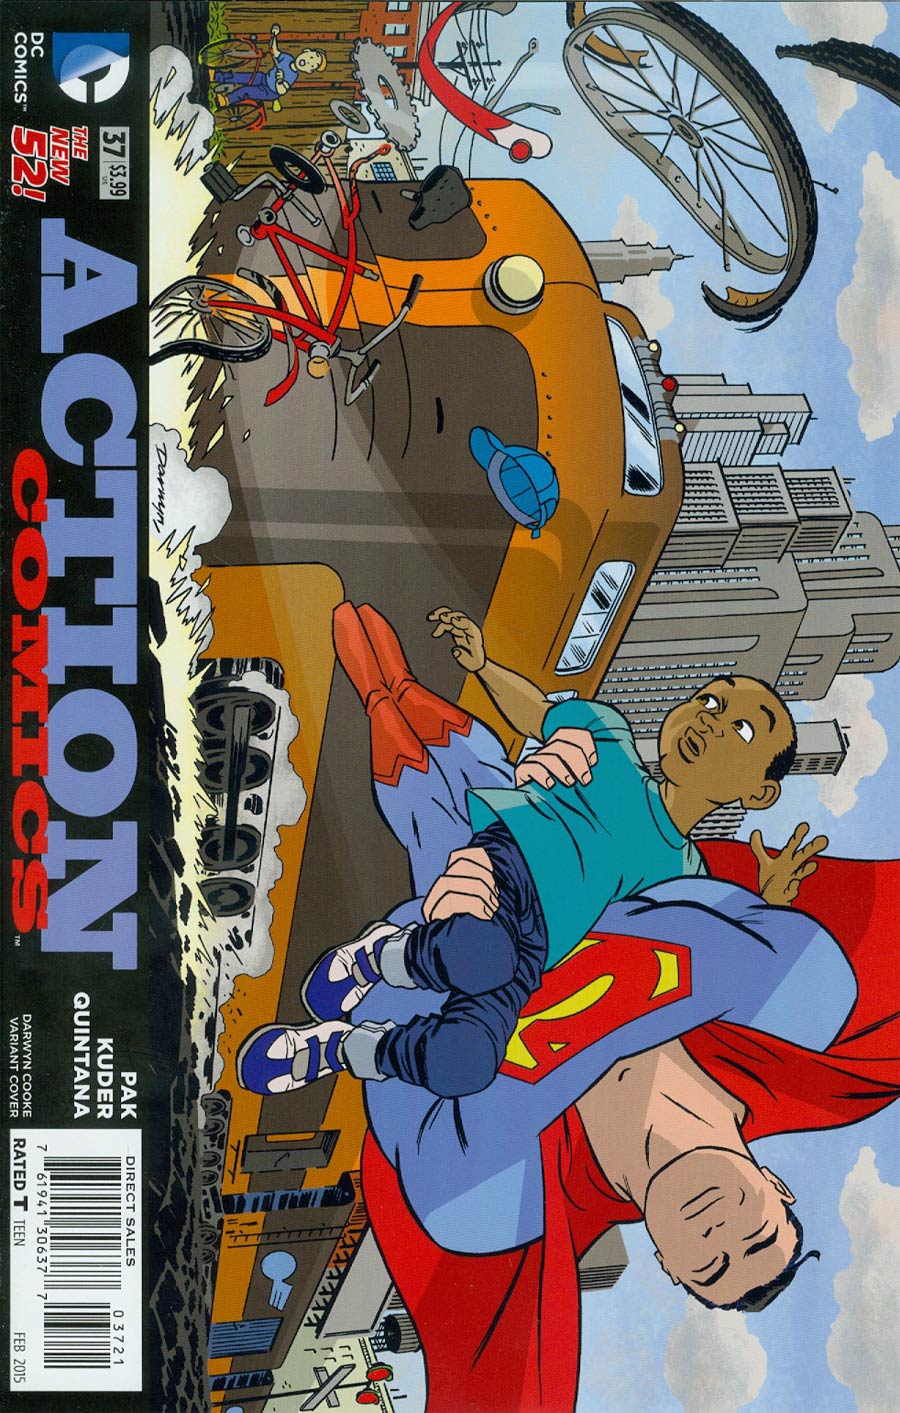 Action Comics Vol 2 #37 Cover B Variant Darwyn Cooke Cover